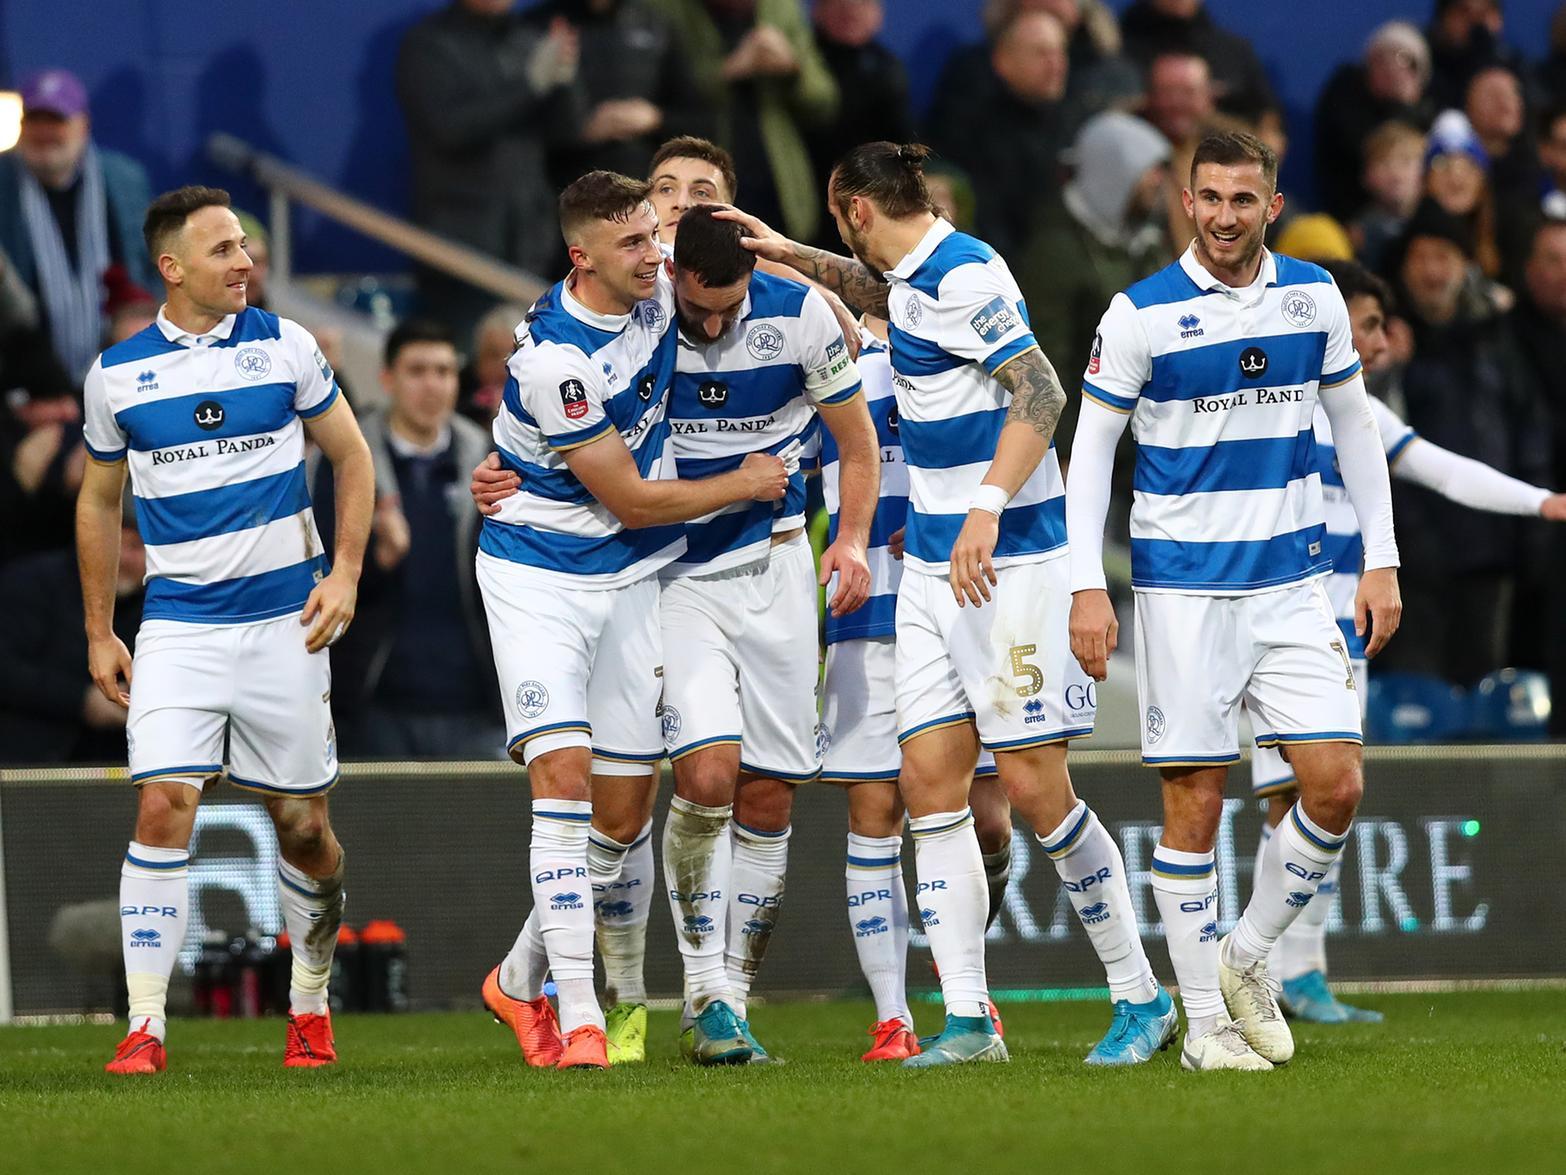 QPR are dangerous in attack, but struggle to stem the tide at the other end.